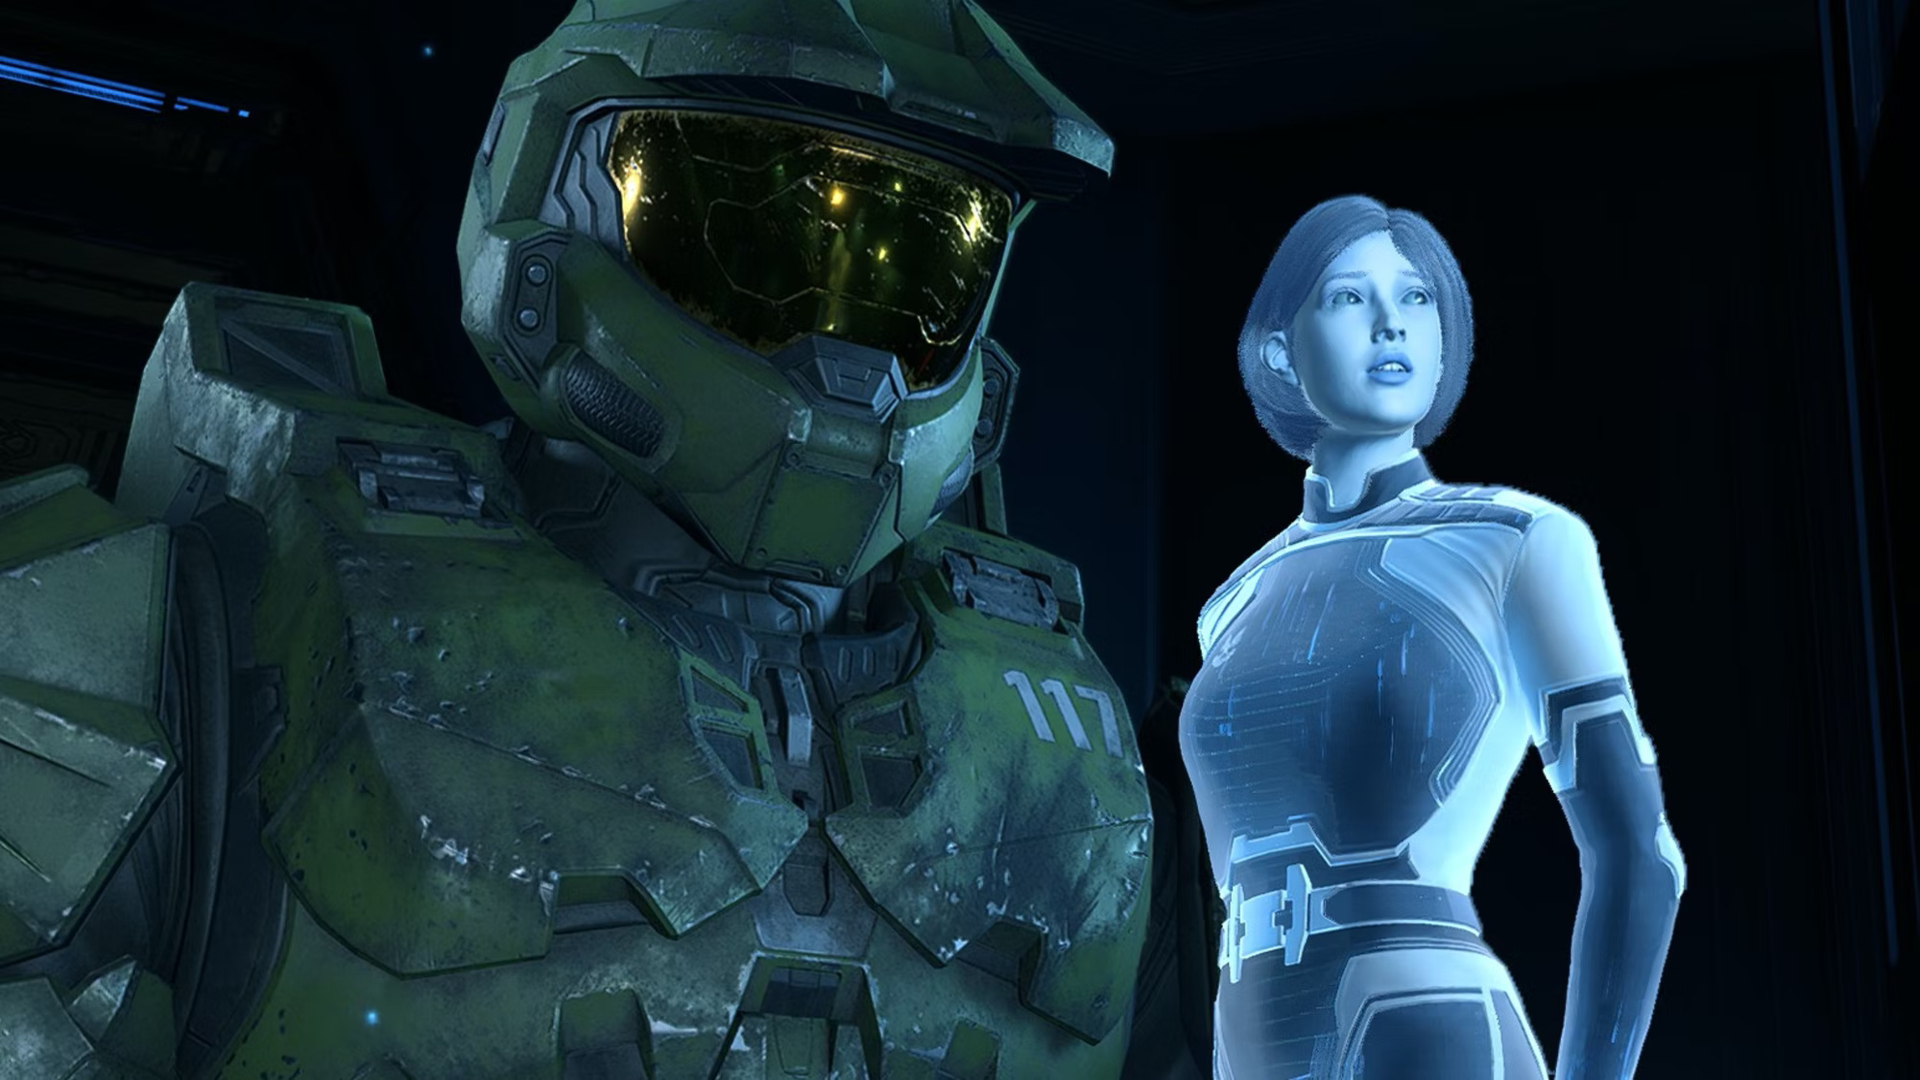 Master Chief and Cortana, standing side by side